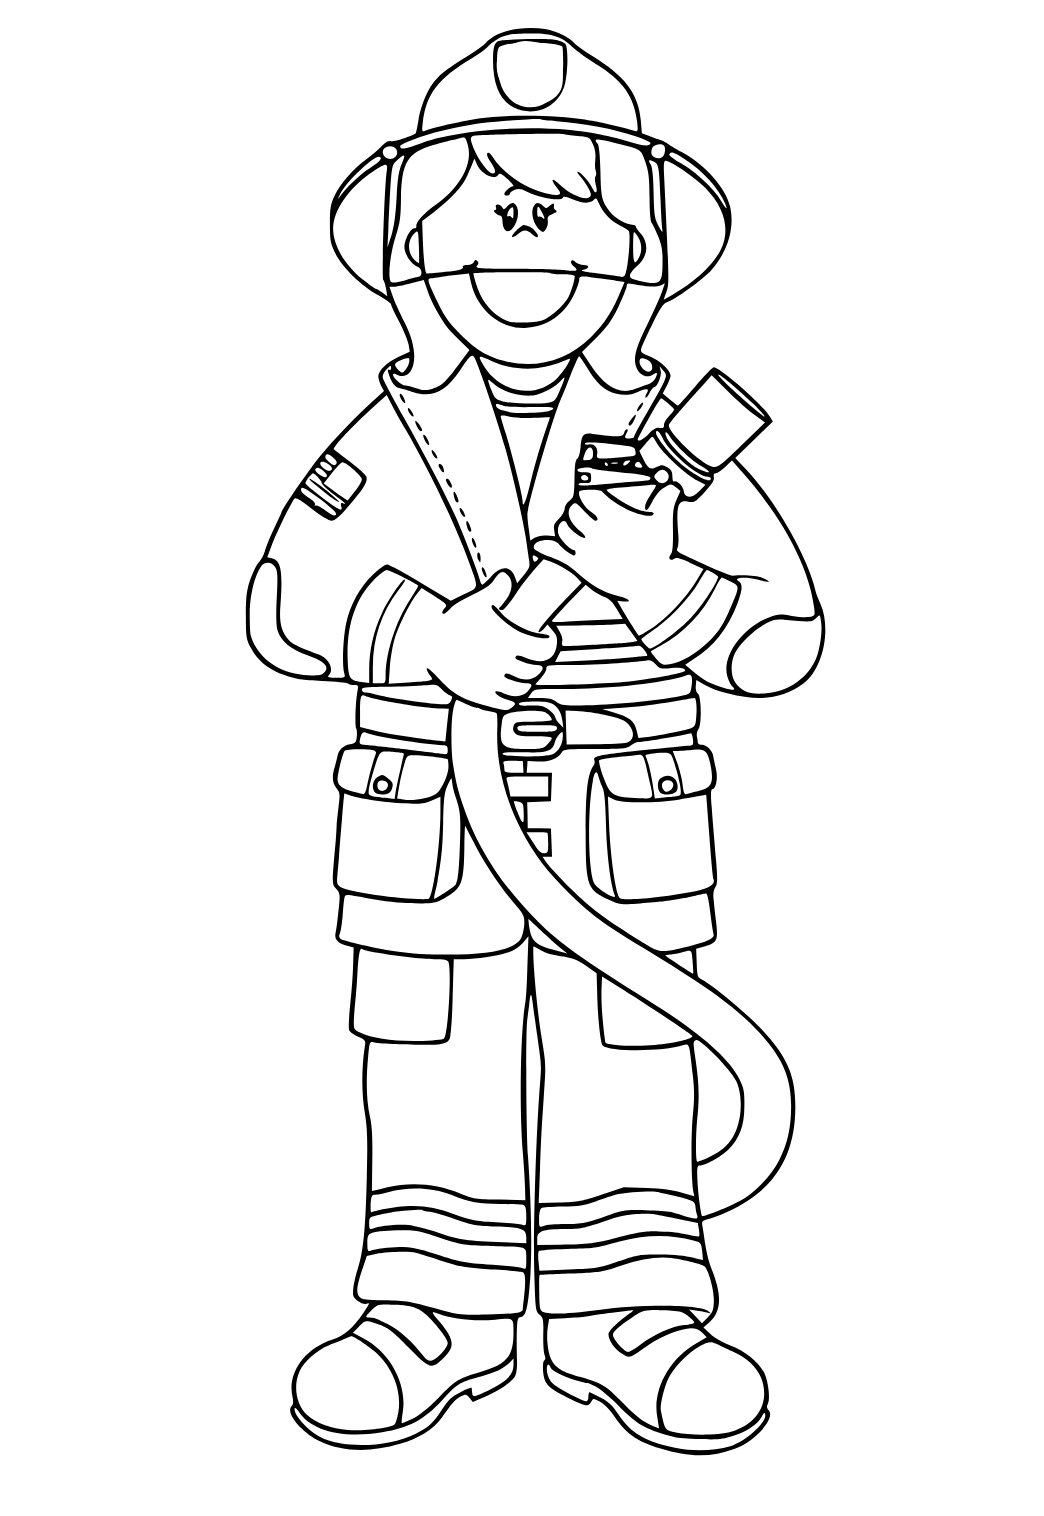 Free printable firefighter smile coloring page for adults and kids